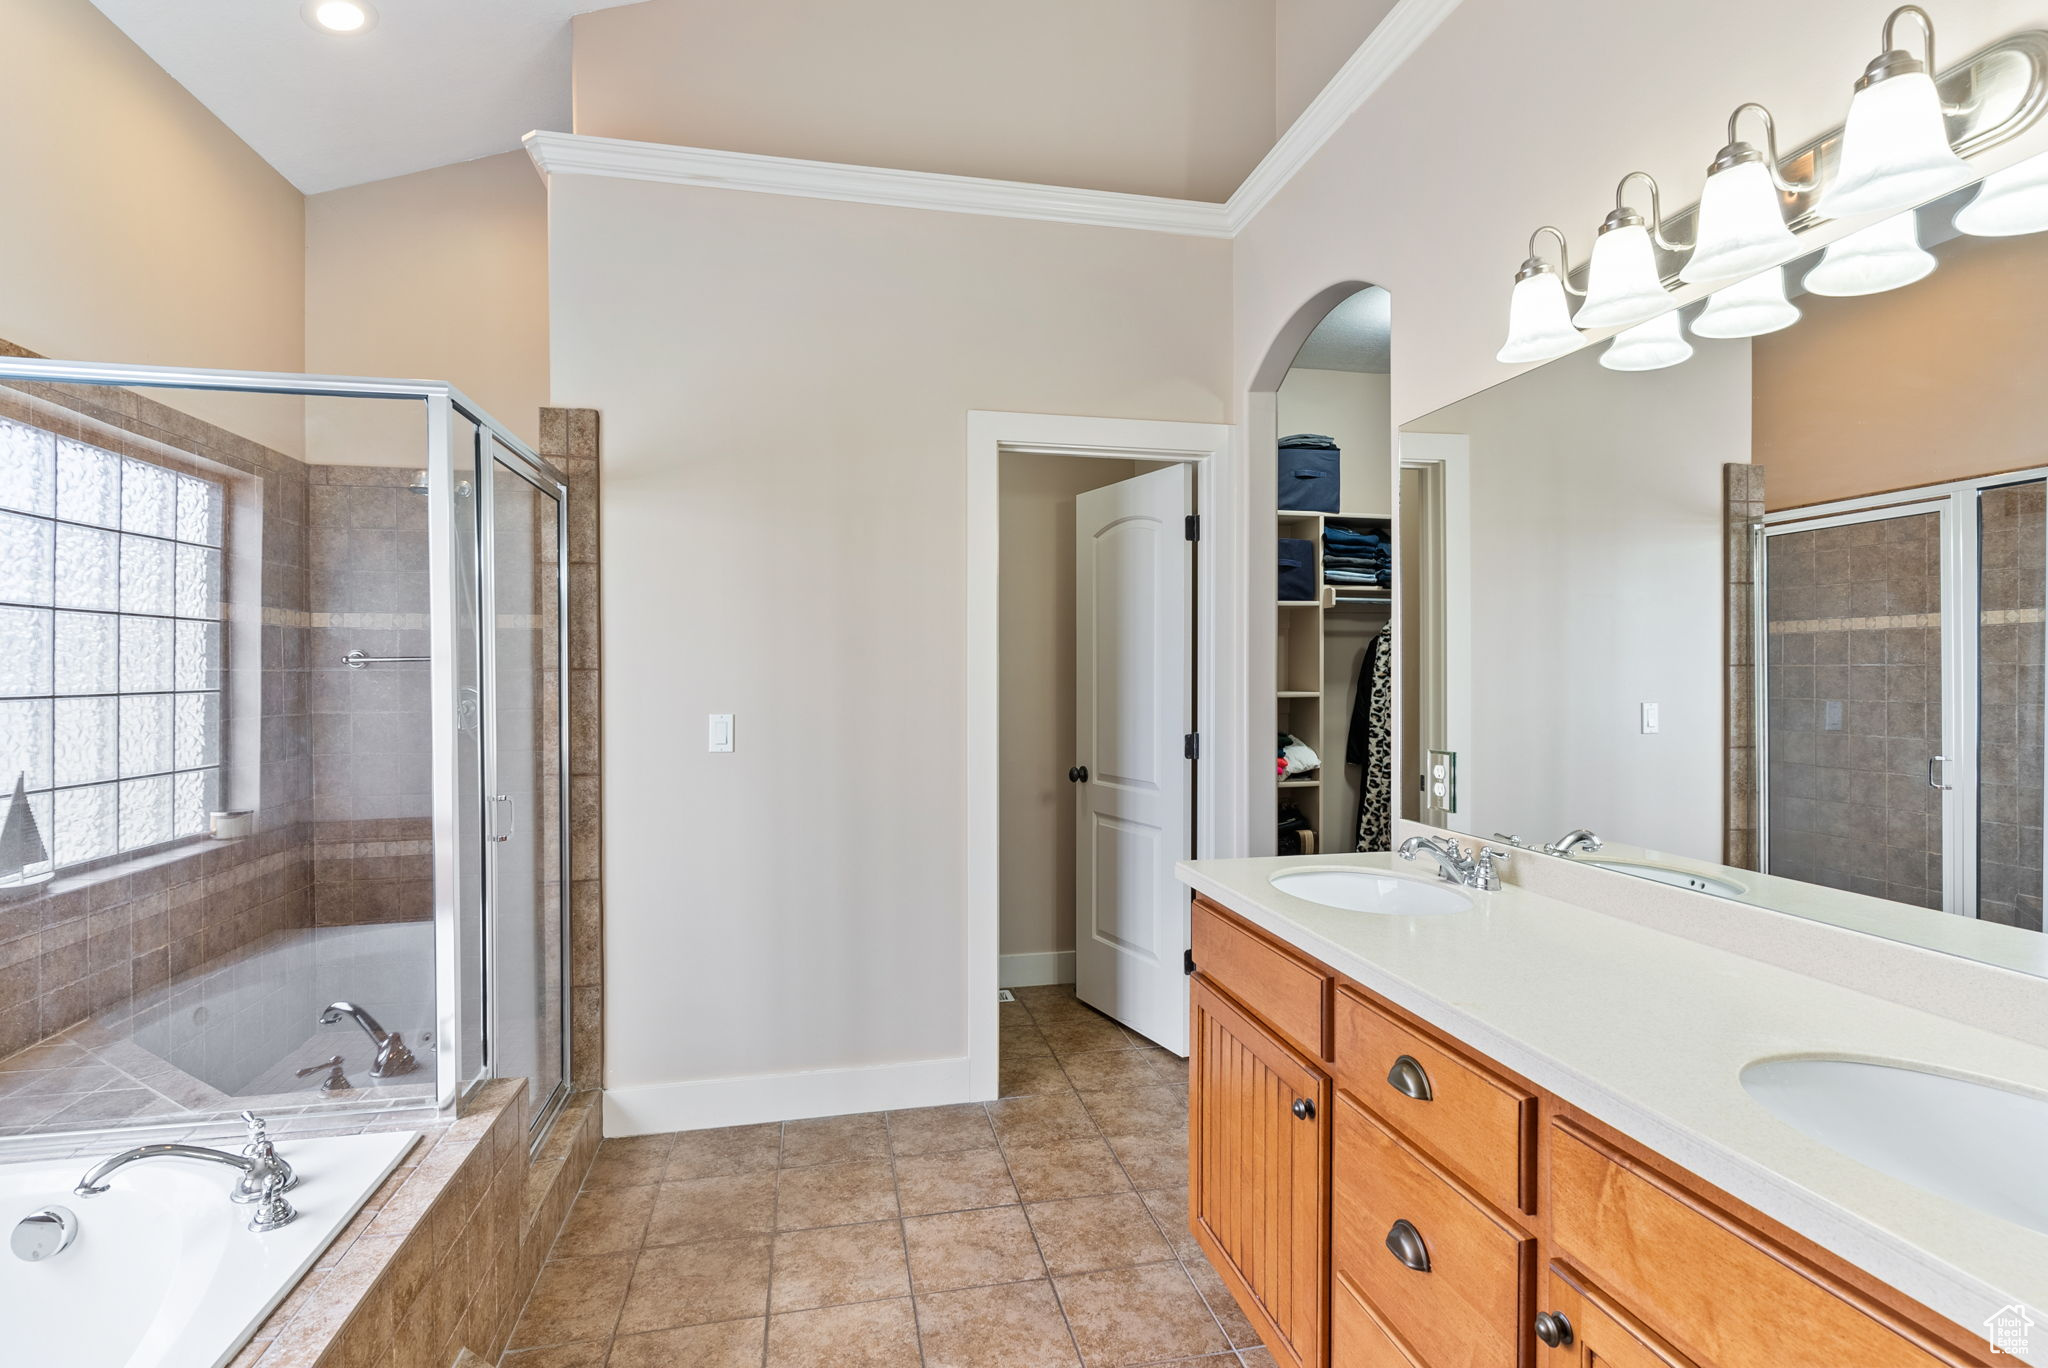 Bathroom featuring crown molding, shower with separate bathtub, dual bowl vanity, and tile flooring